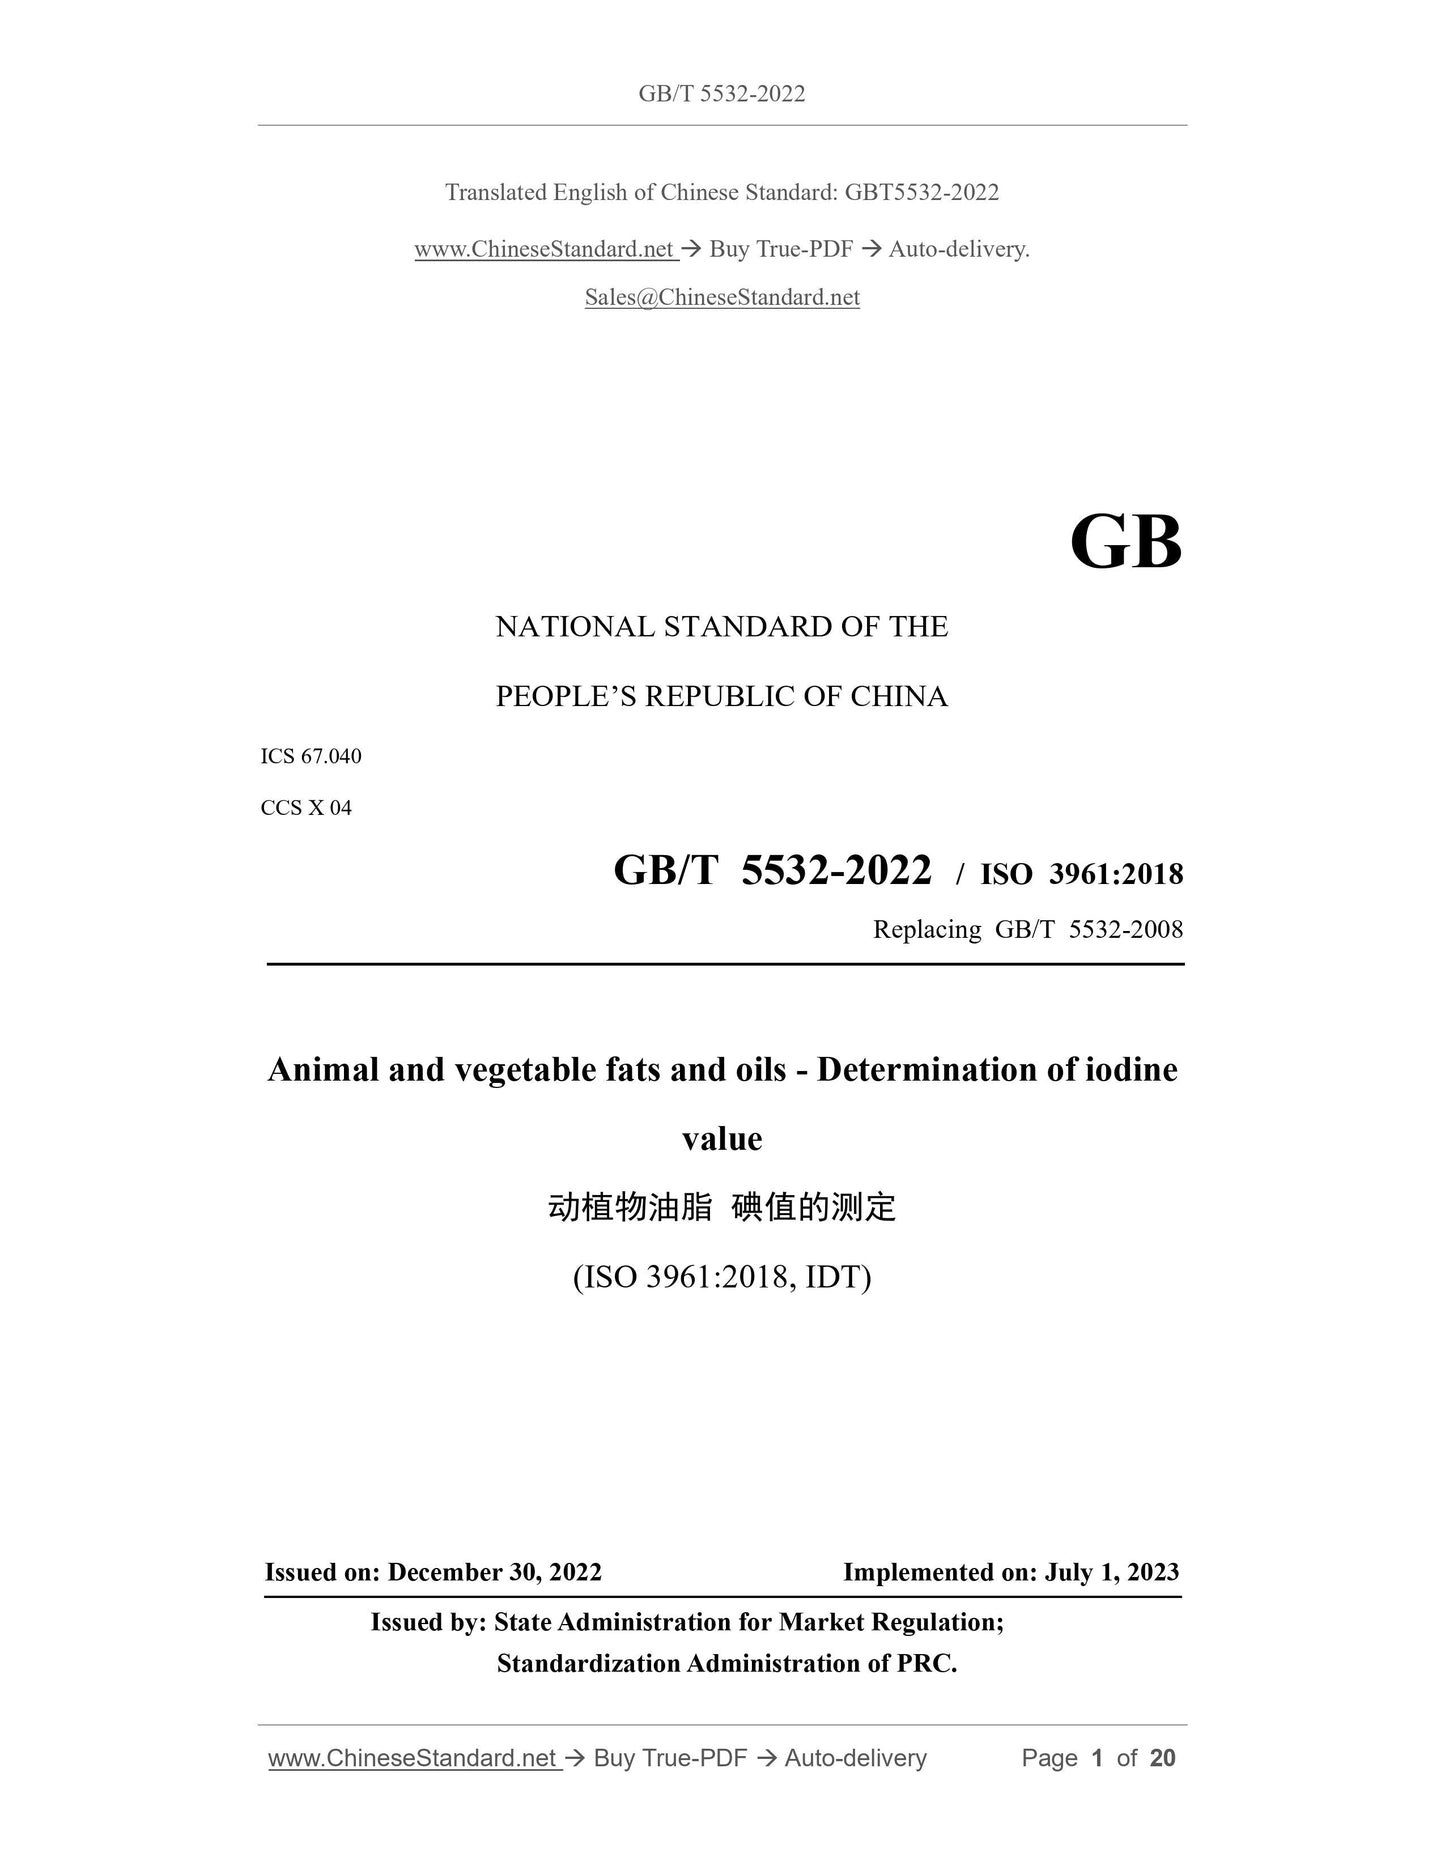 GB/T 5532-2022 Page 1